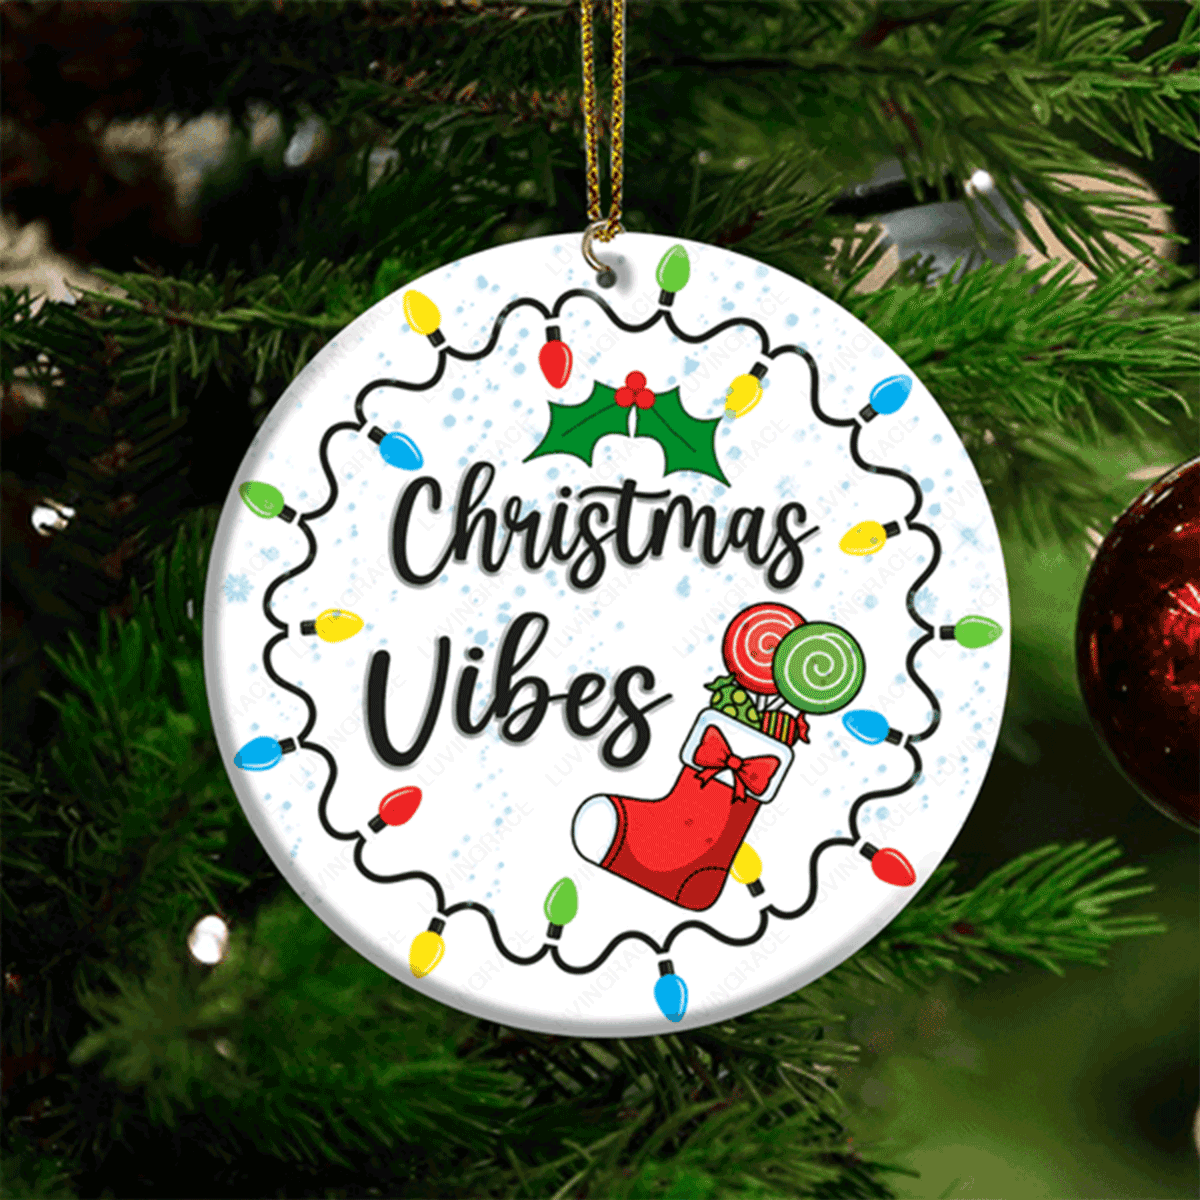 Jesus Acrylic Ornament, Light Wire And Candy Sock Christmas Vibes Acrylic Ornament For Christian, God Faith Believers, Holiday Decor